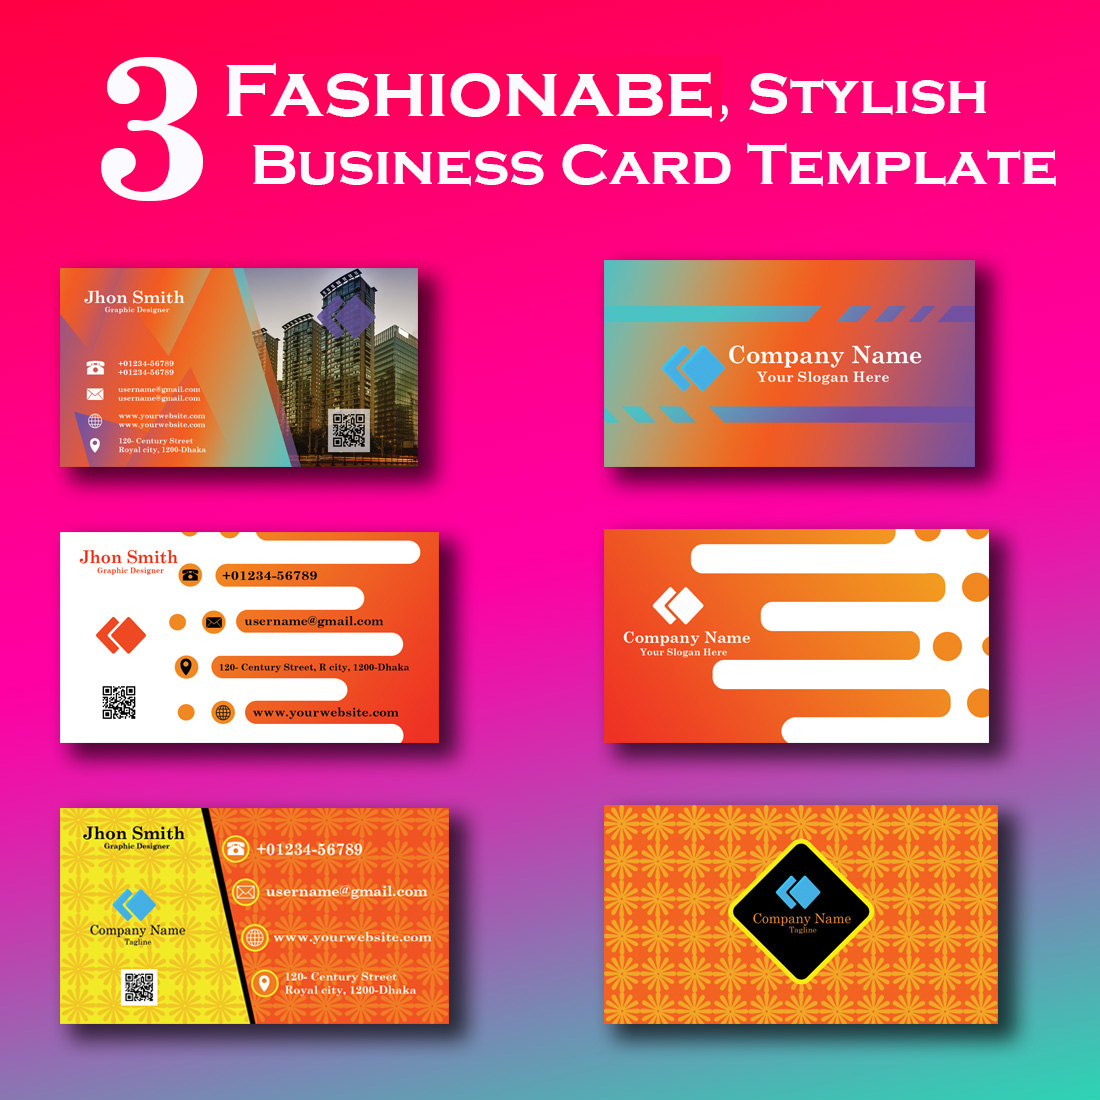 3 Fashionable Stylish Business Card Template preview image.